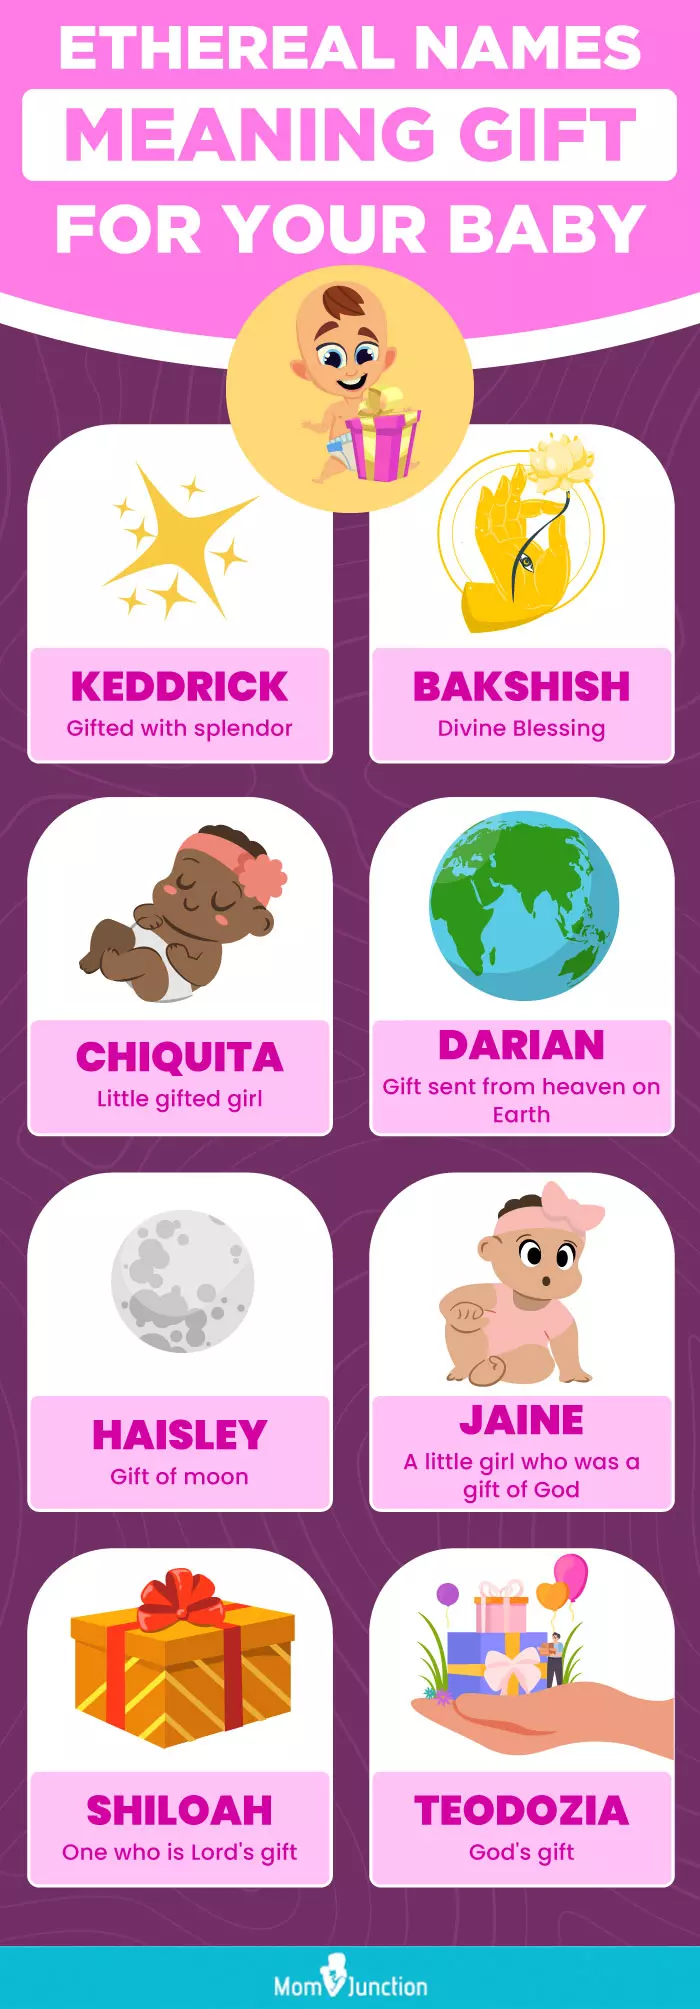 ethereal names meaning gift for your baby (infographic)